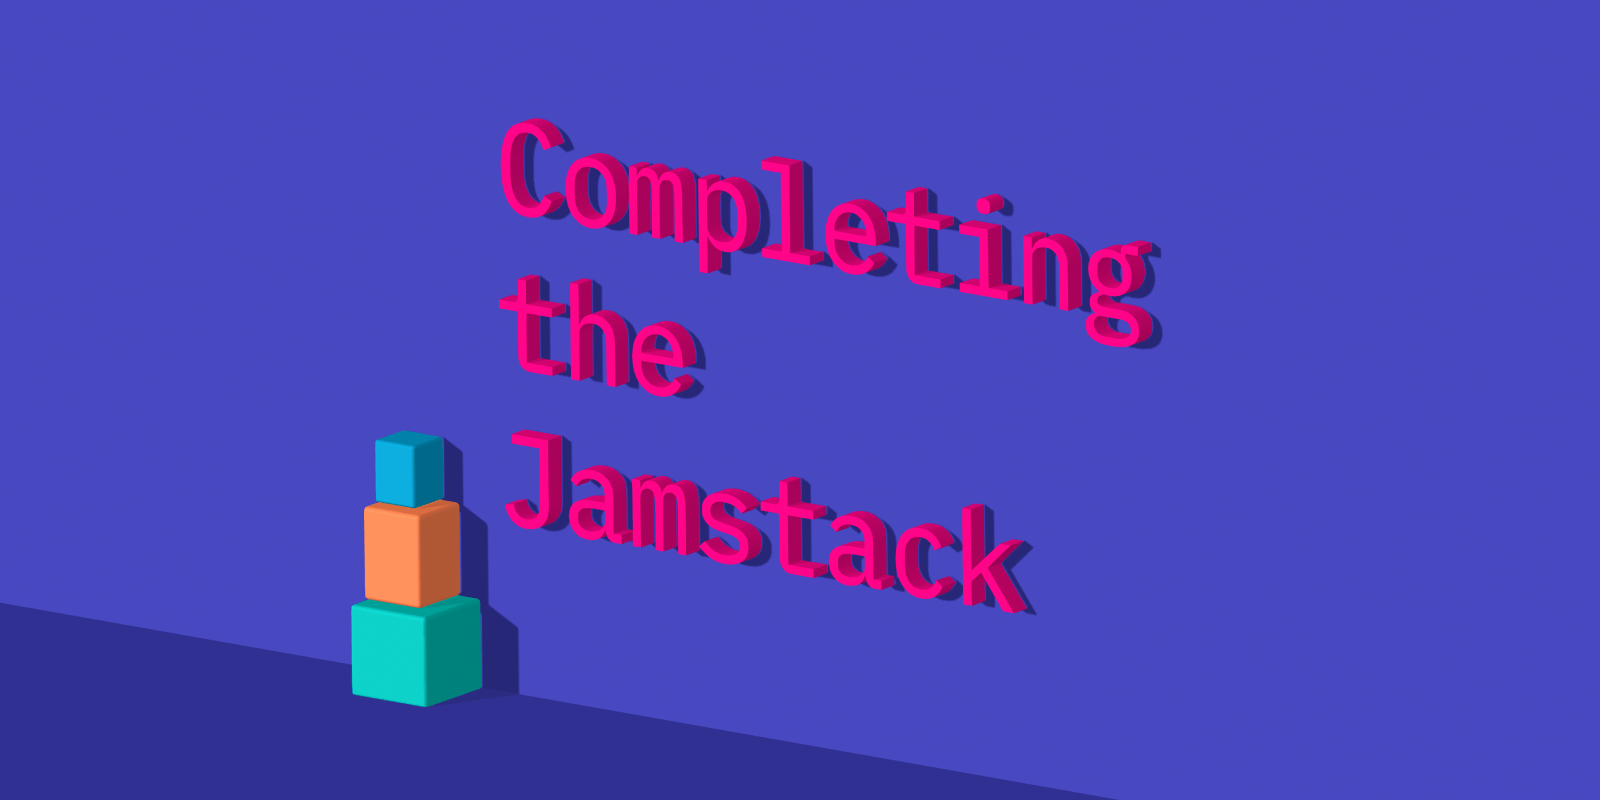 Featured image for Completing the Jamstack: What's needed in 2022? blog post